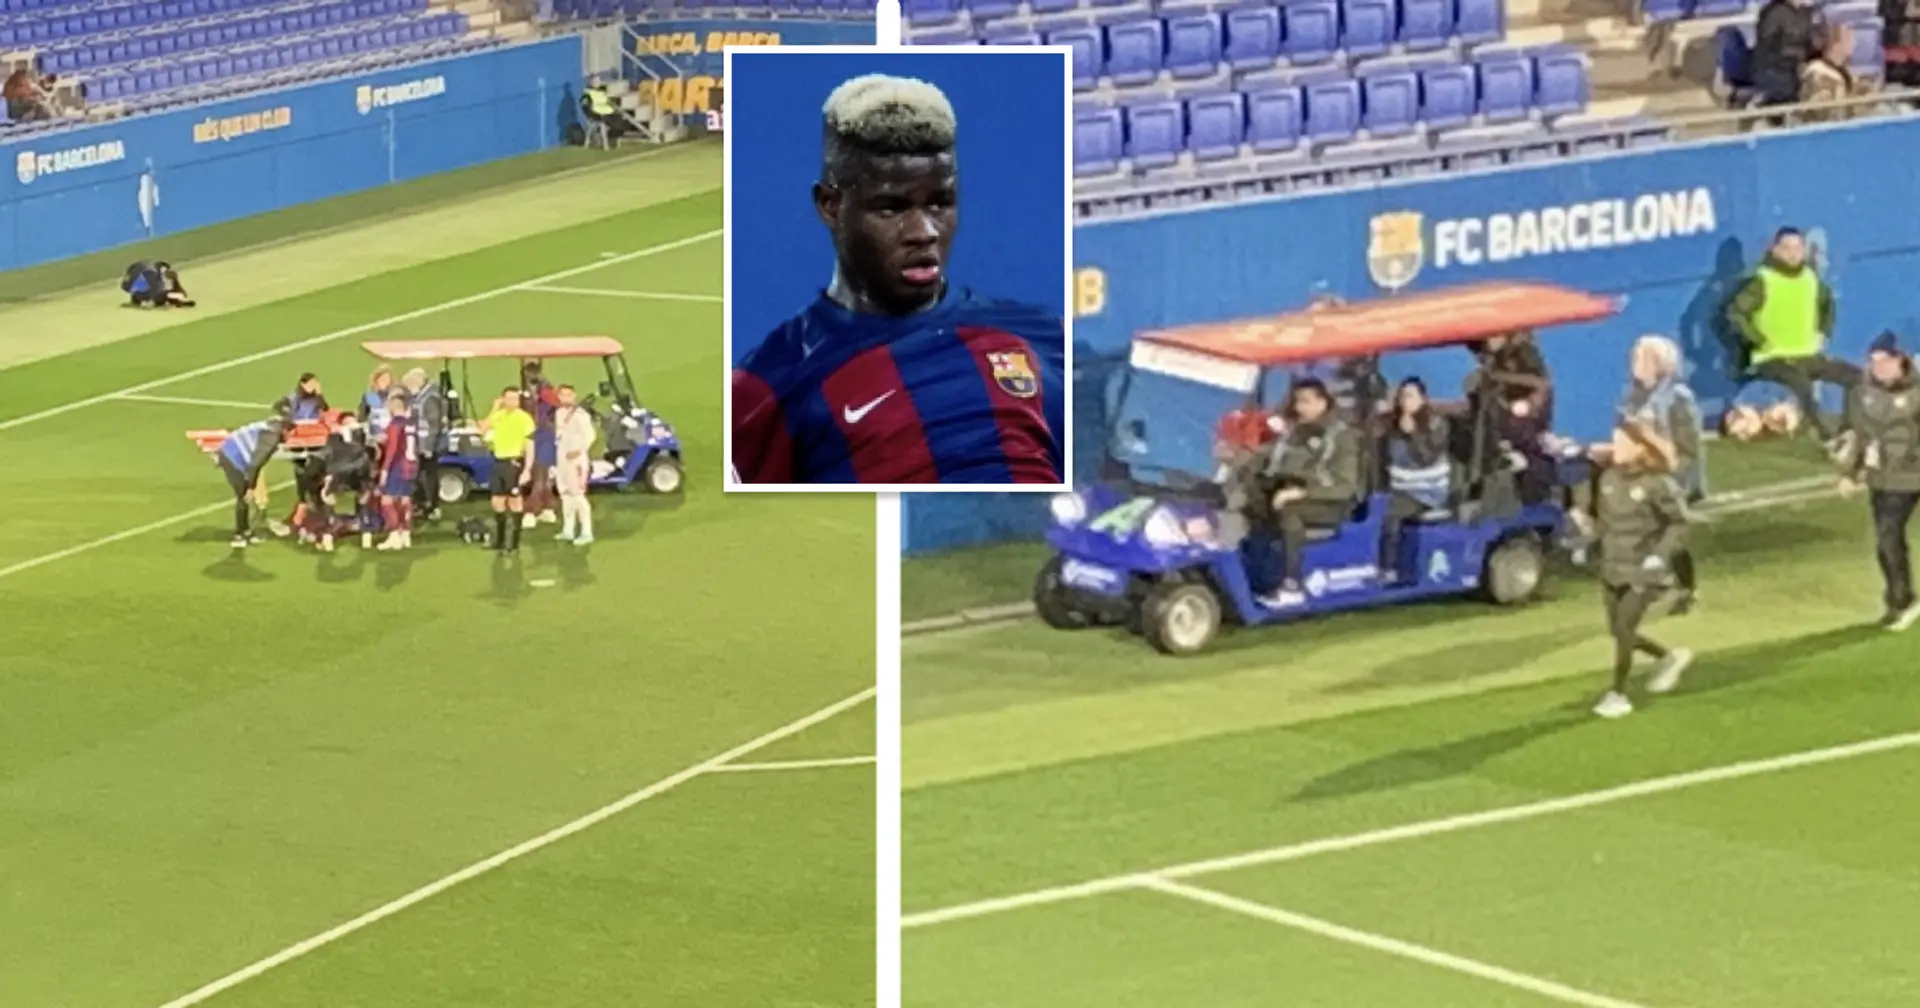 Mikayil 'The Monster' Faye stretchered off after heavy collision in Barca Atletic clash